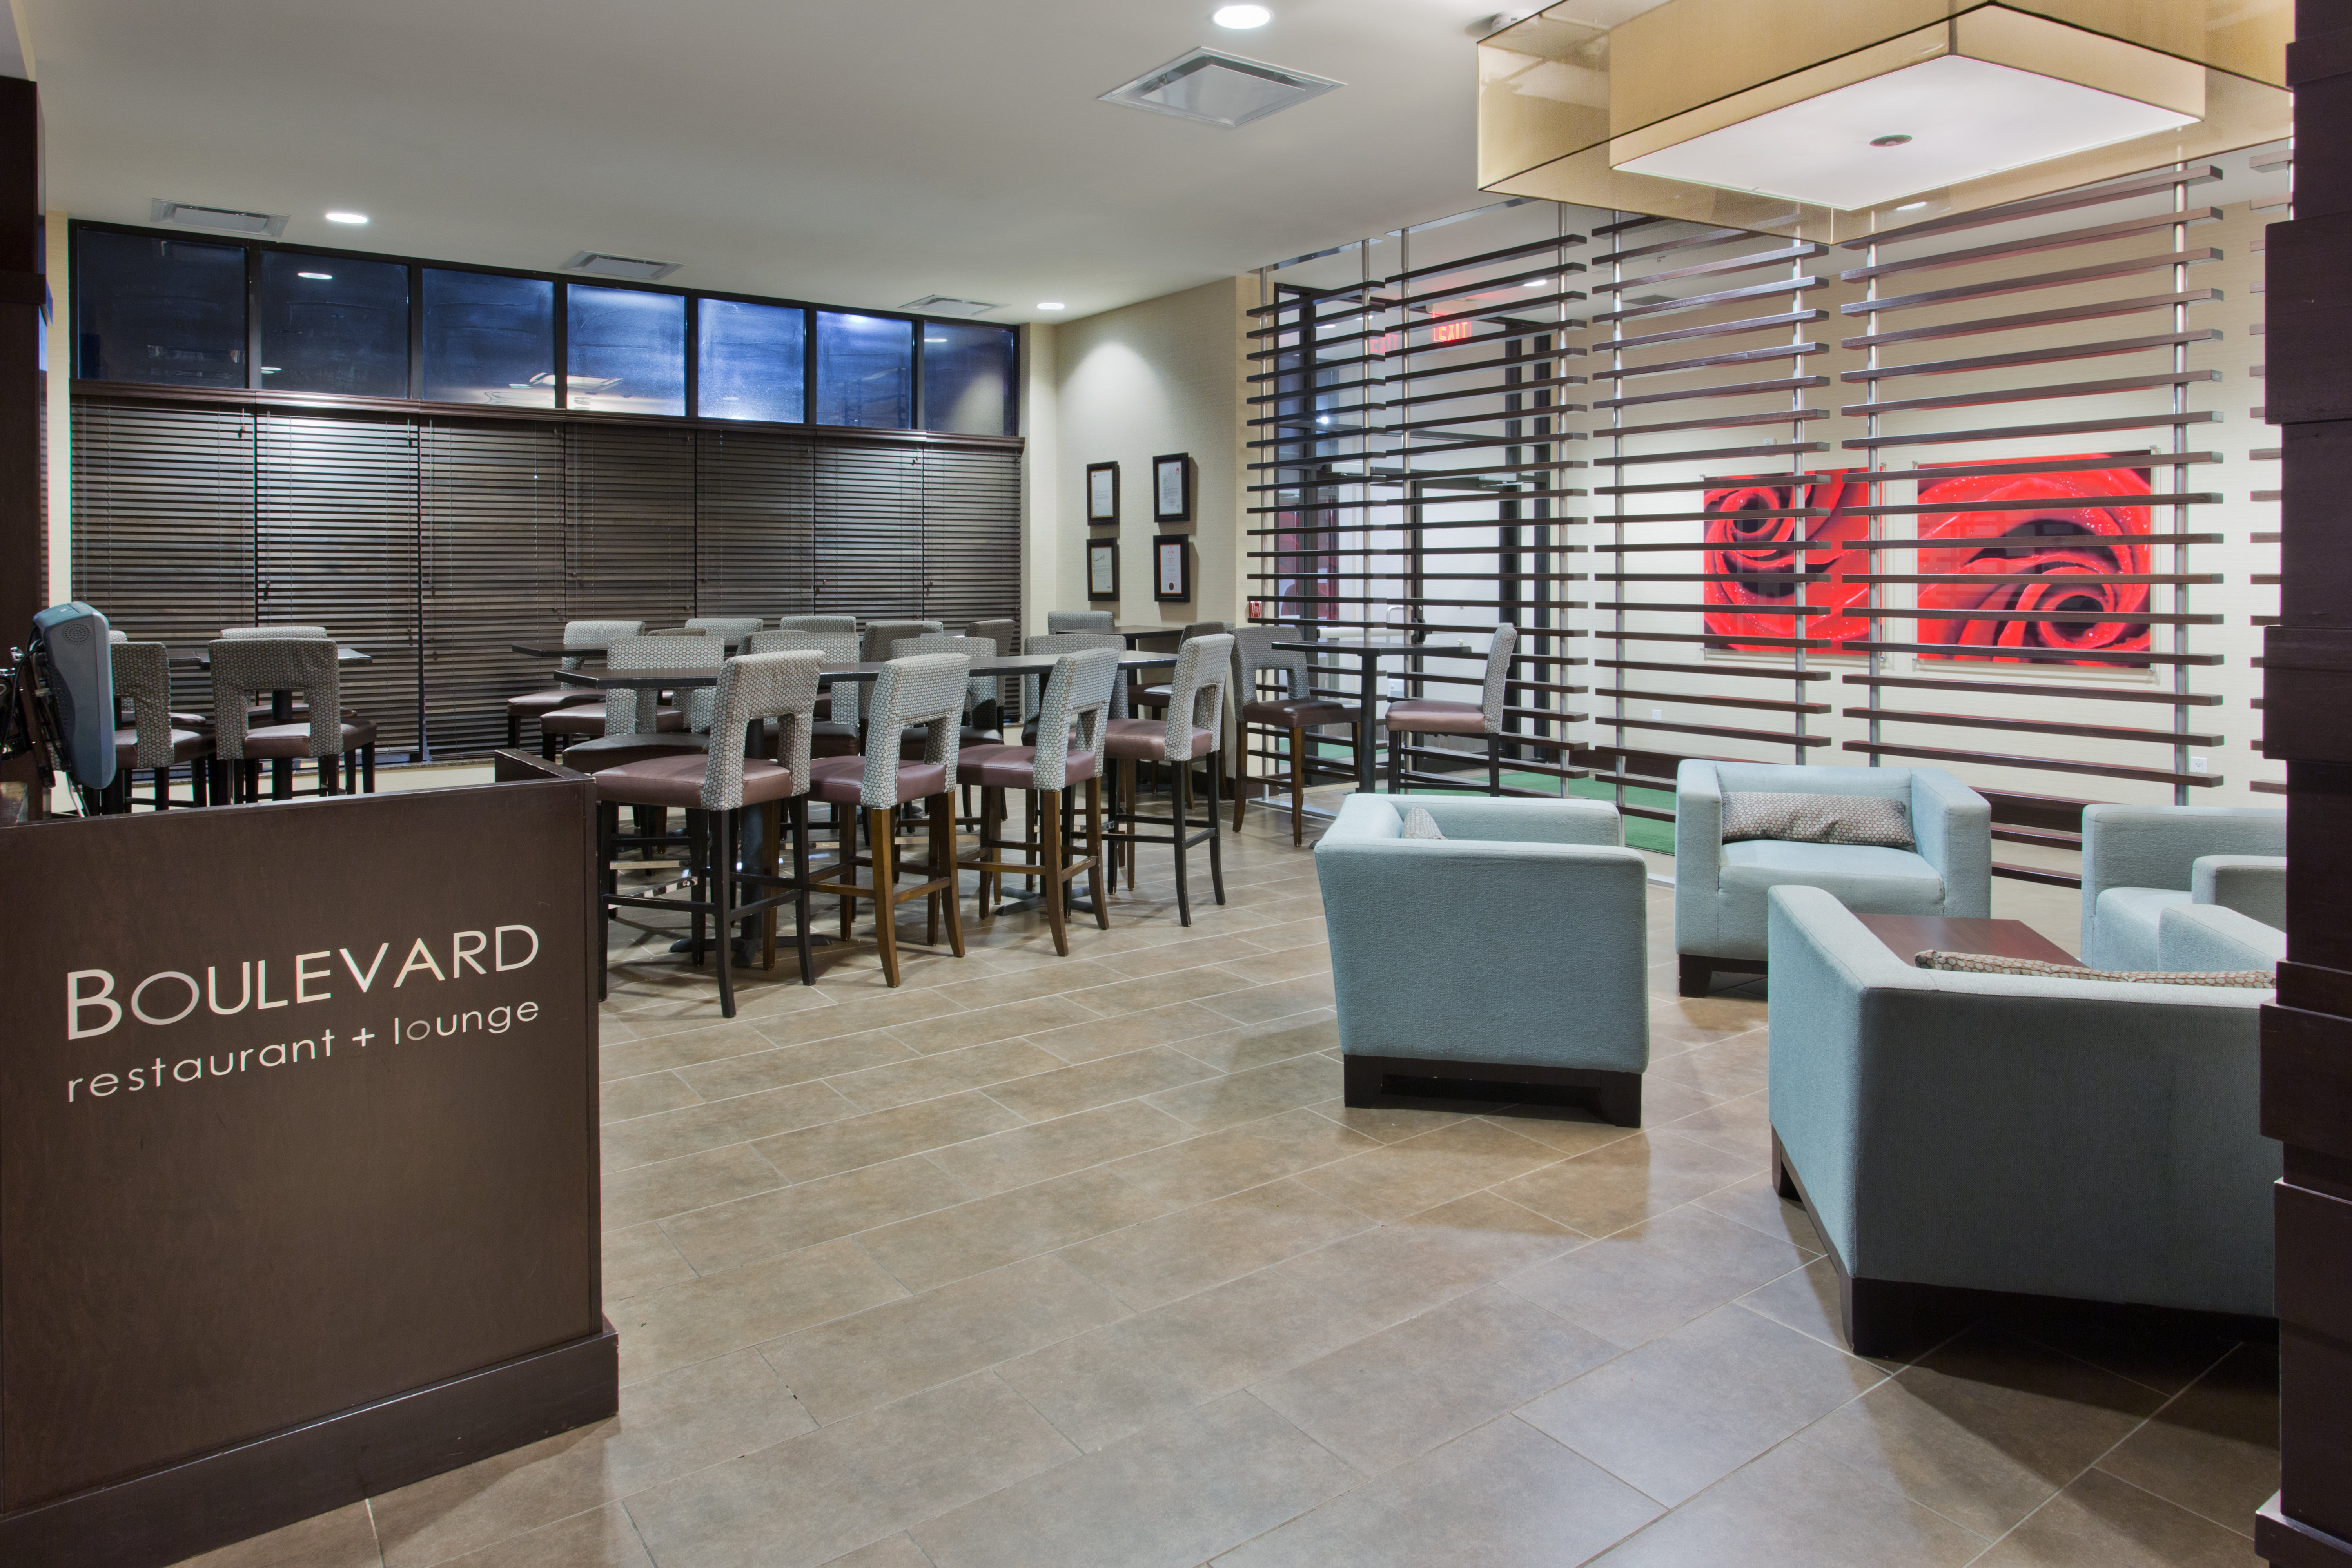 Welcome to the Holiday Inn & Suites Red Deer Boulevard 